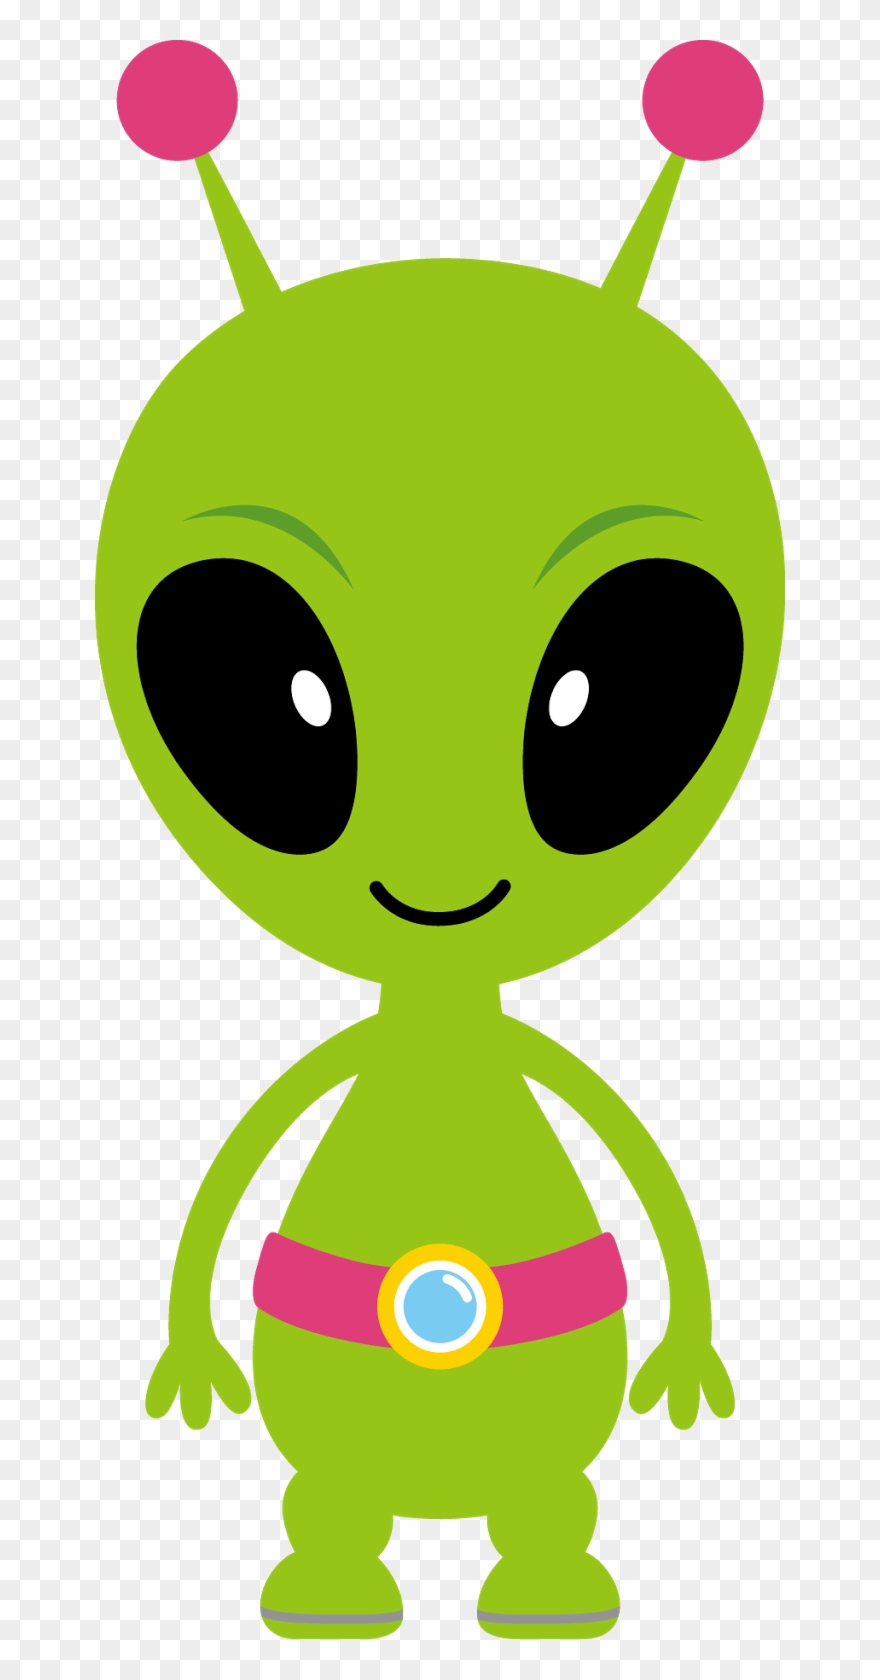 Background alien of png. Aliens clipart